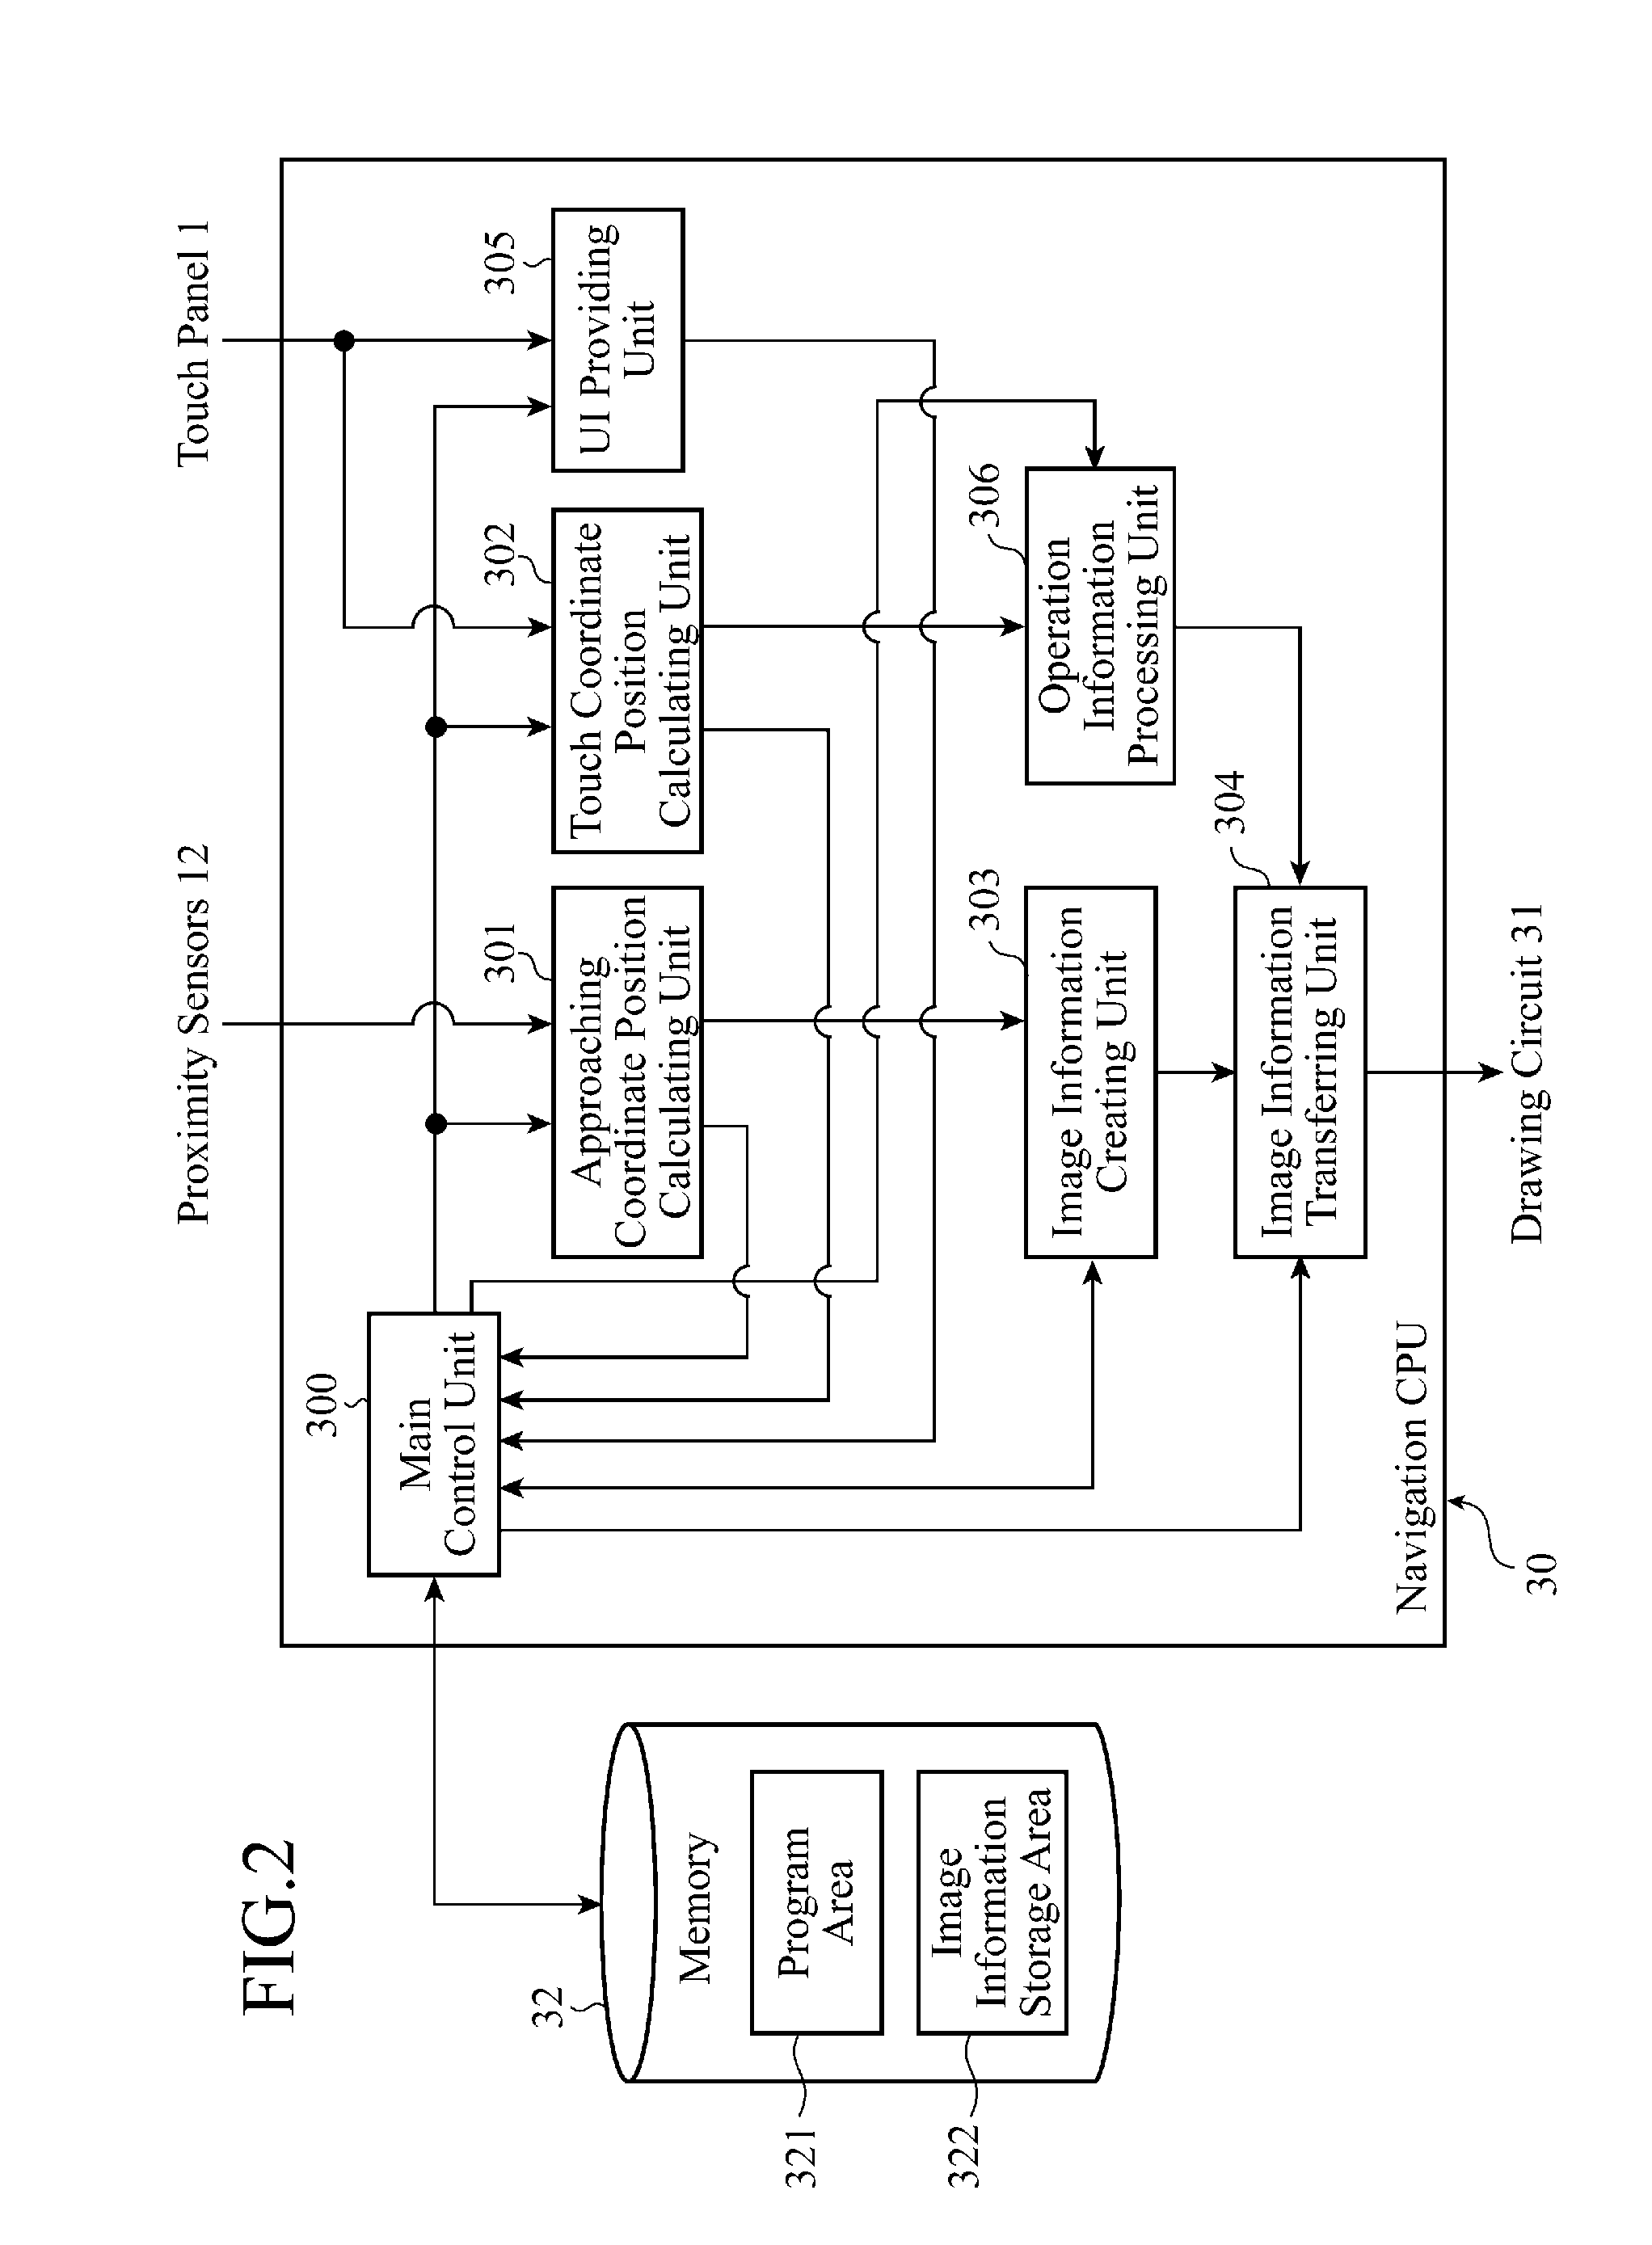 Display input device and navigation device